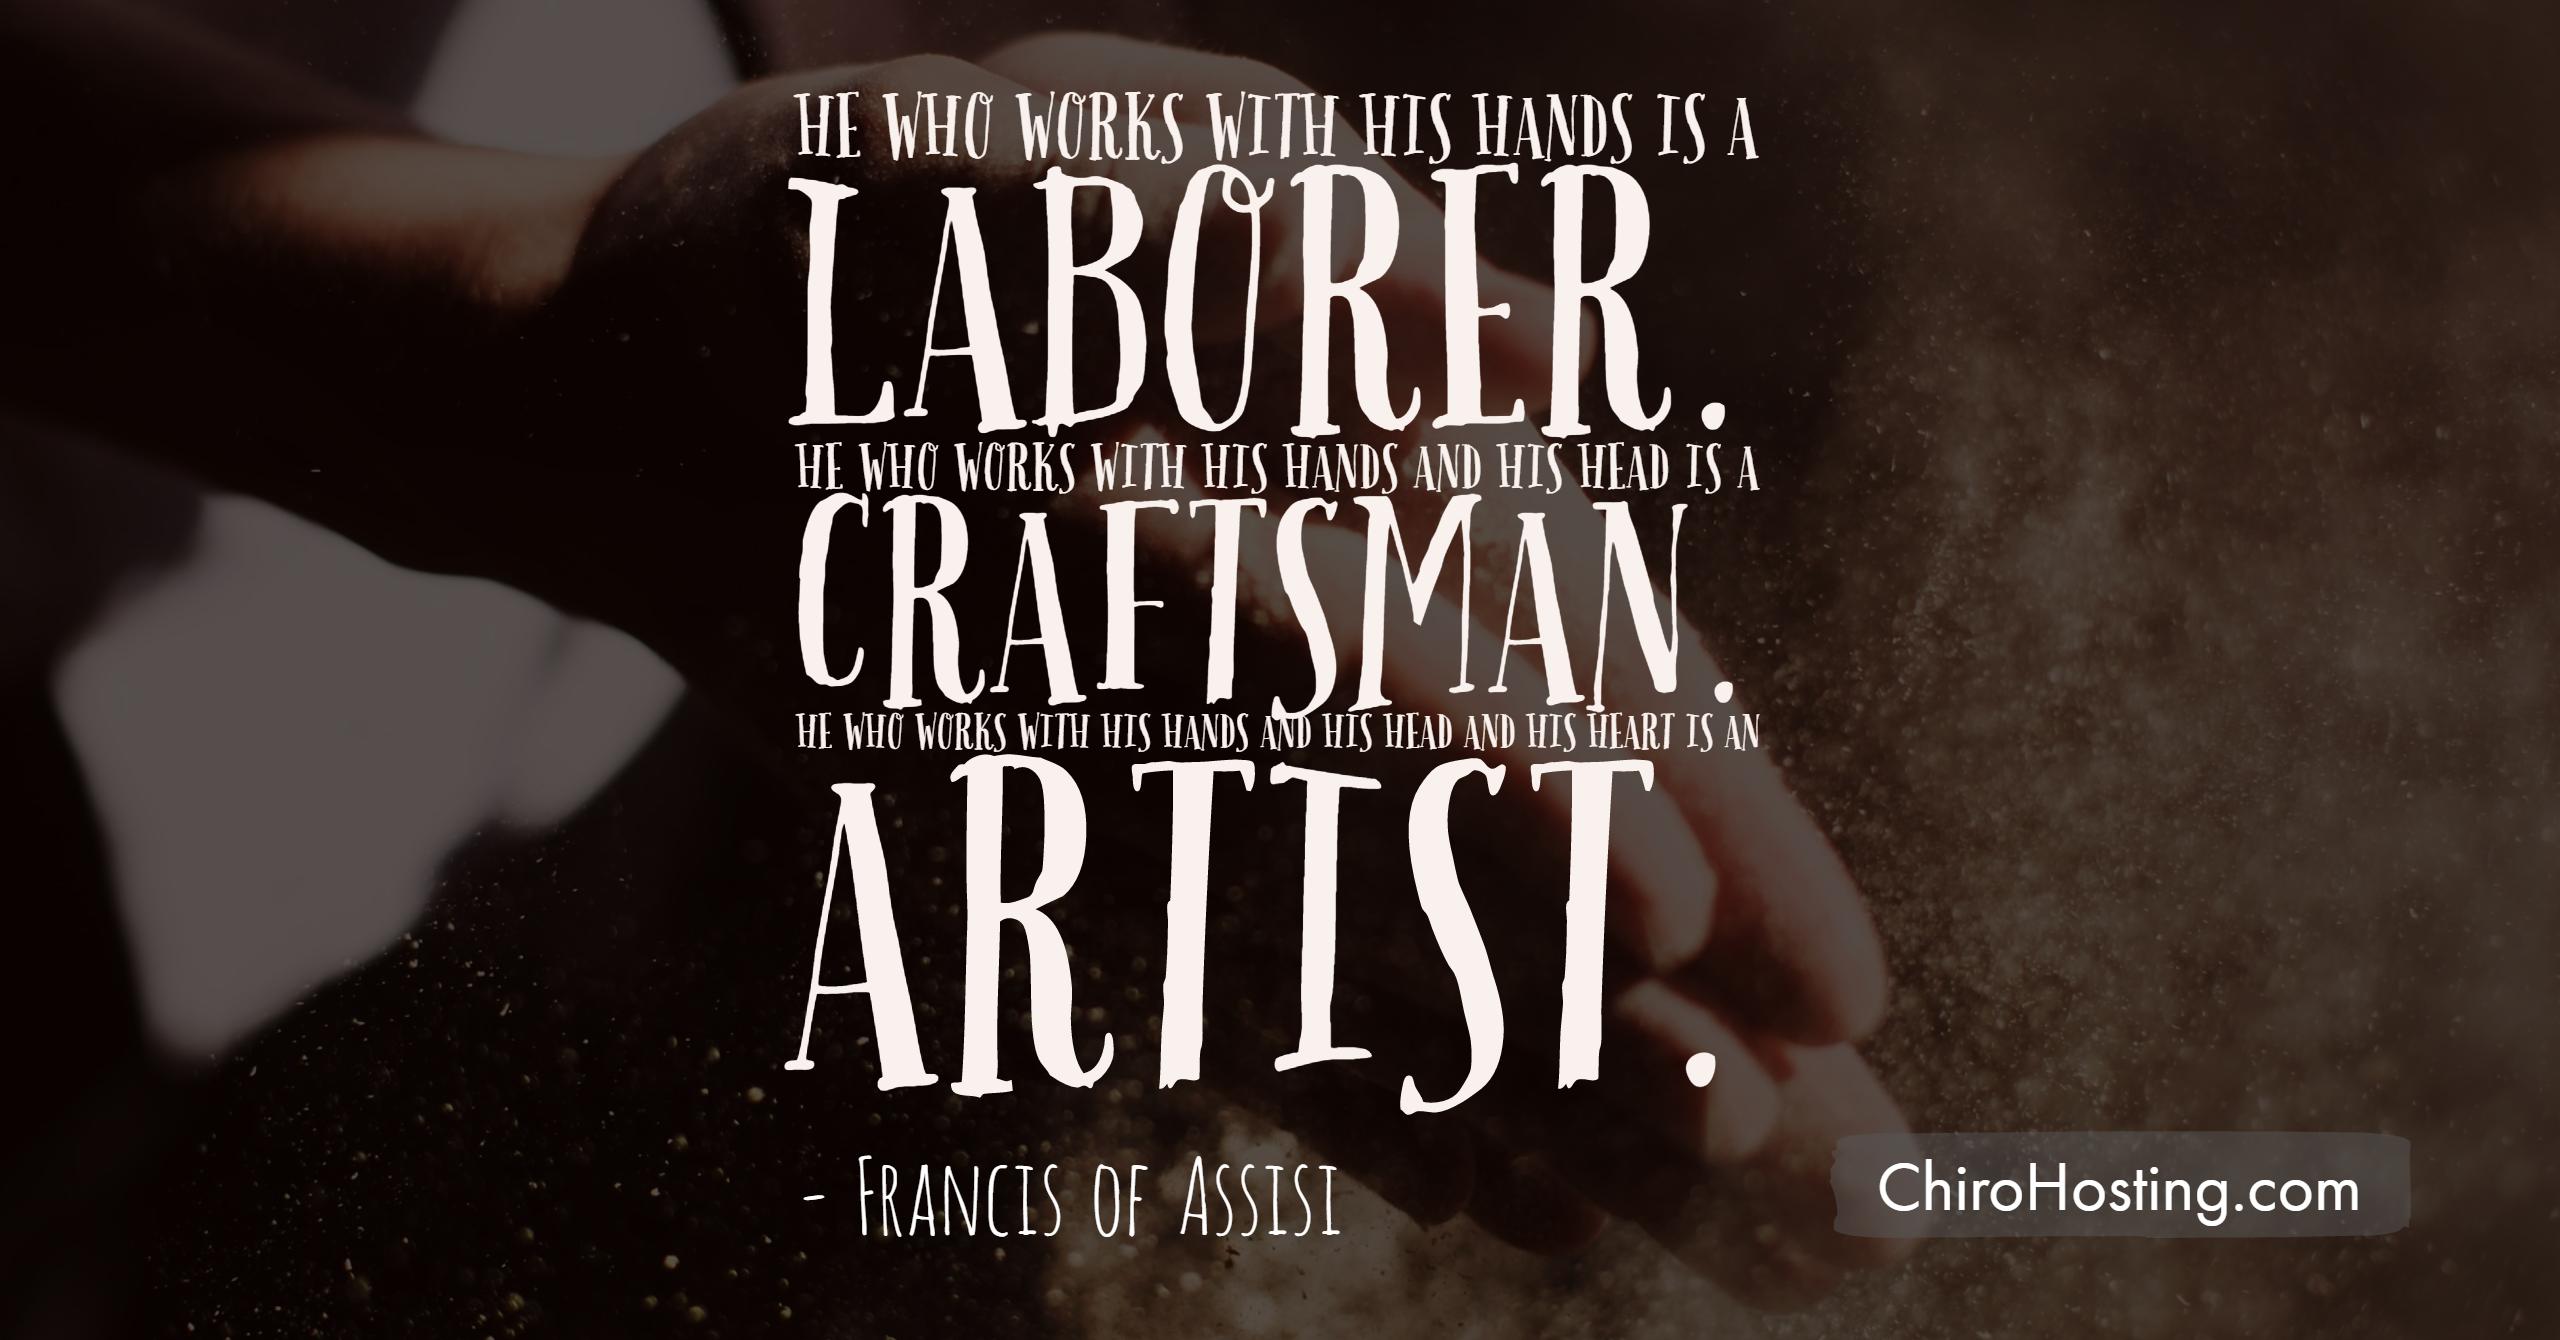 He Who Works with His Hands Is a Laborer...